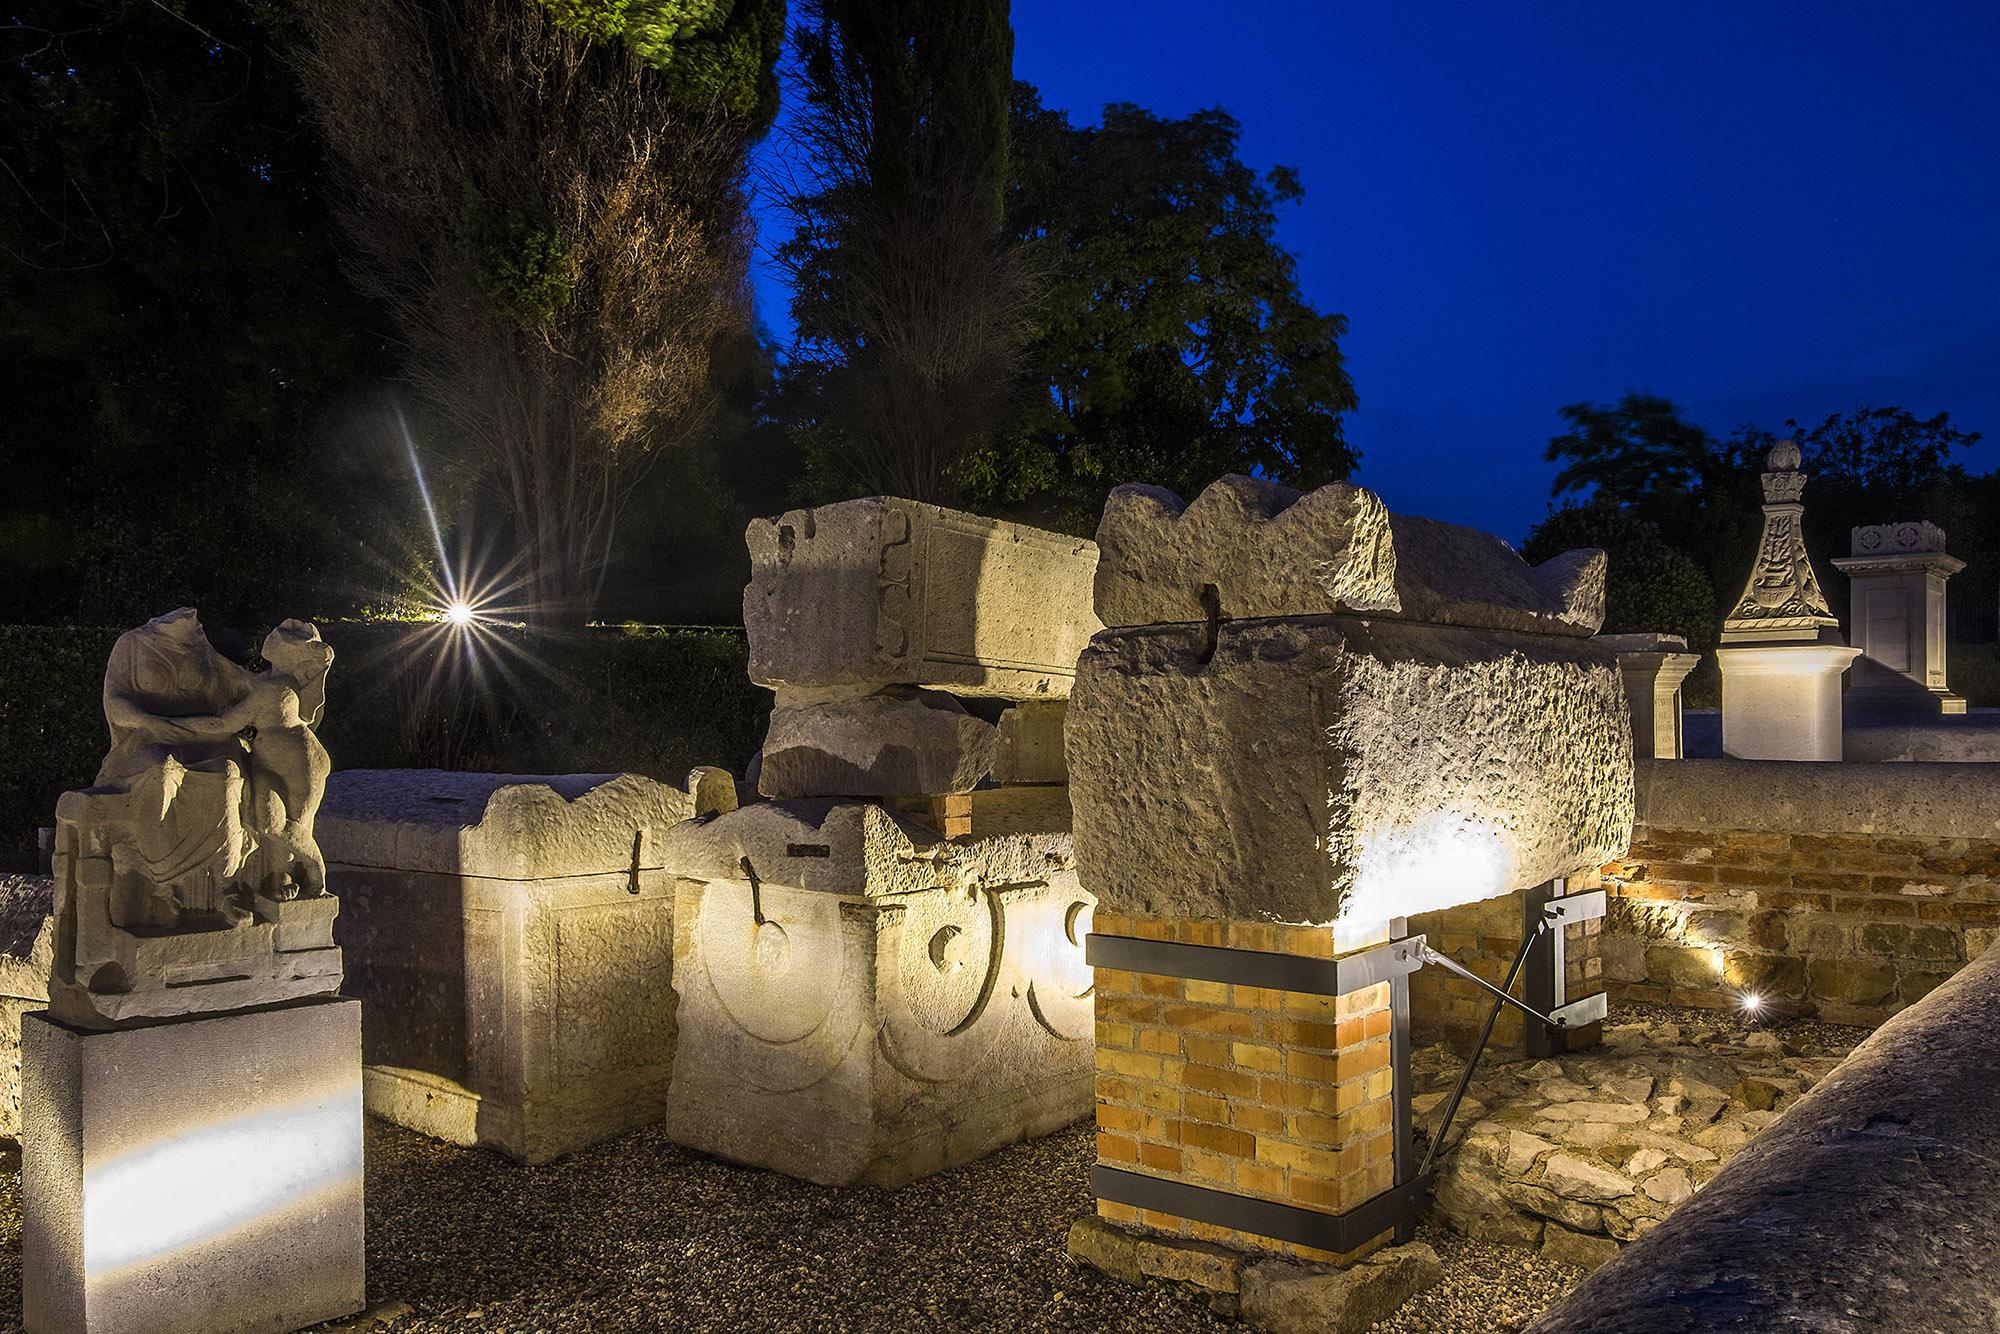 The area of the Necropolis, dating back to the 1st-3rd  centuries AD, is the only visible portion of several Roman burial grounds once found around Aquileia. – © Gianluca Baronchelli